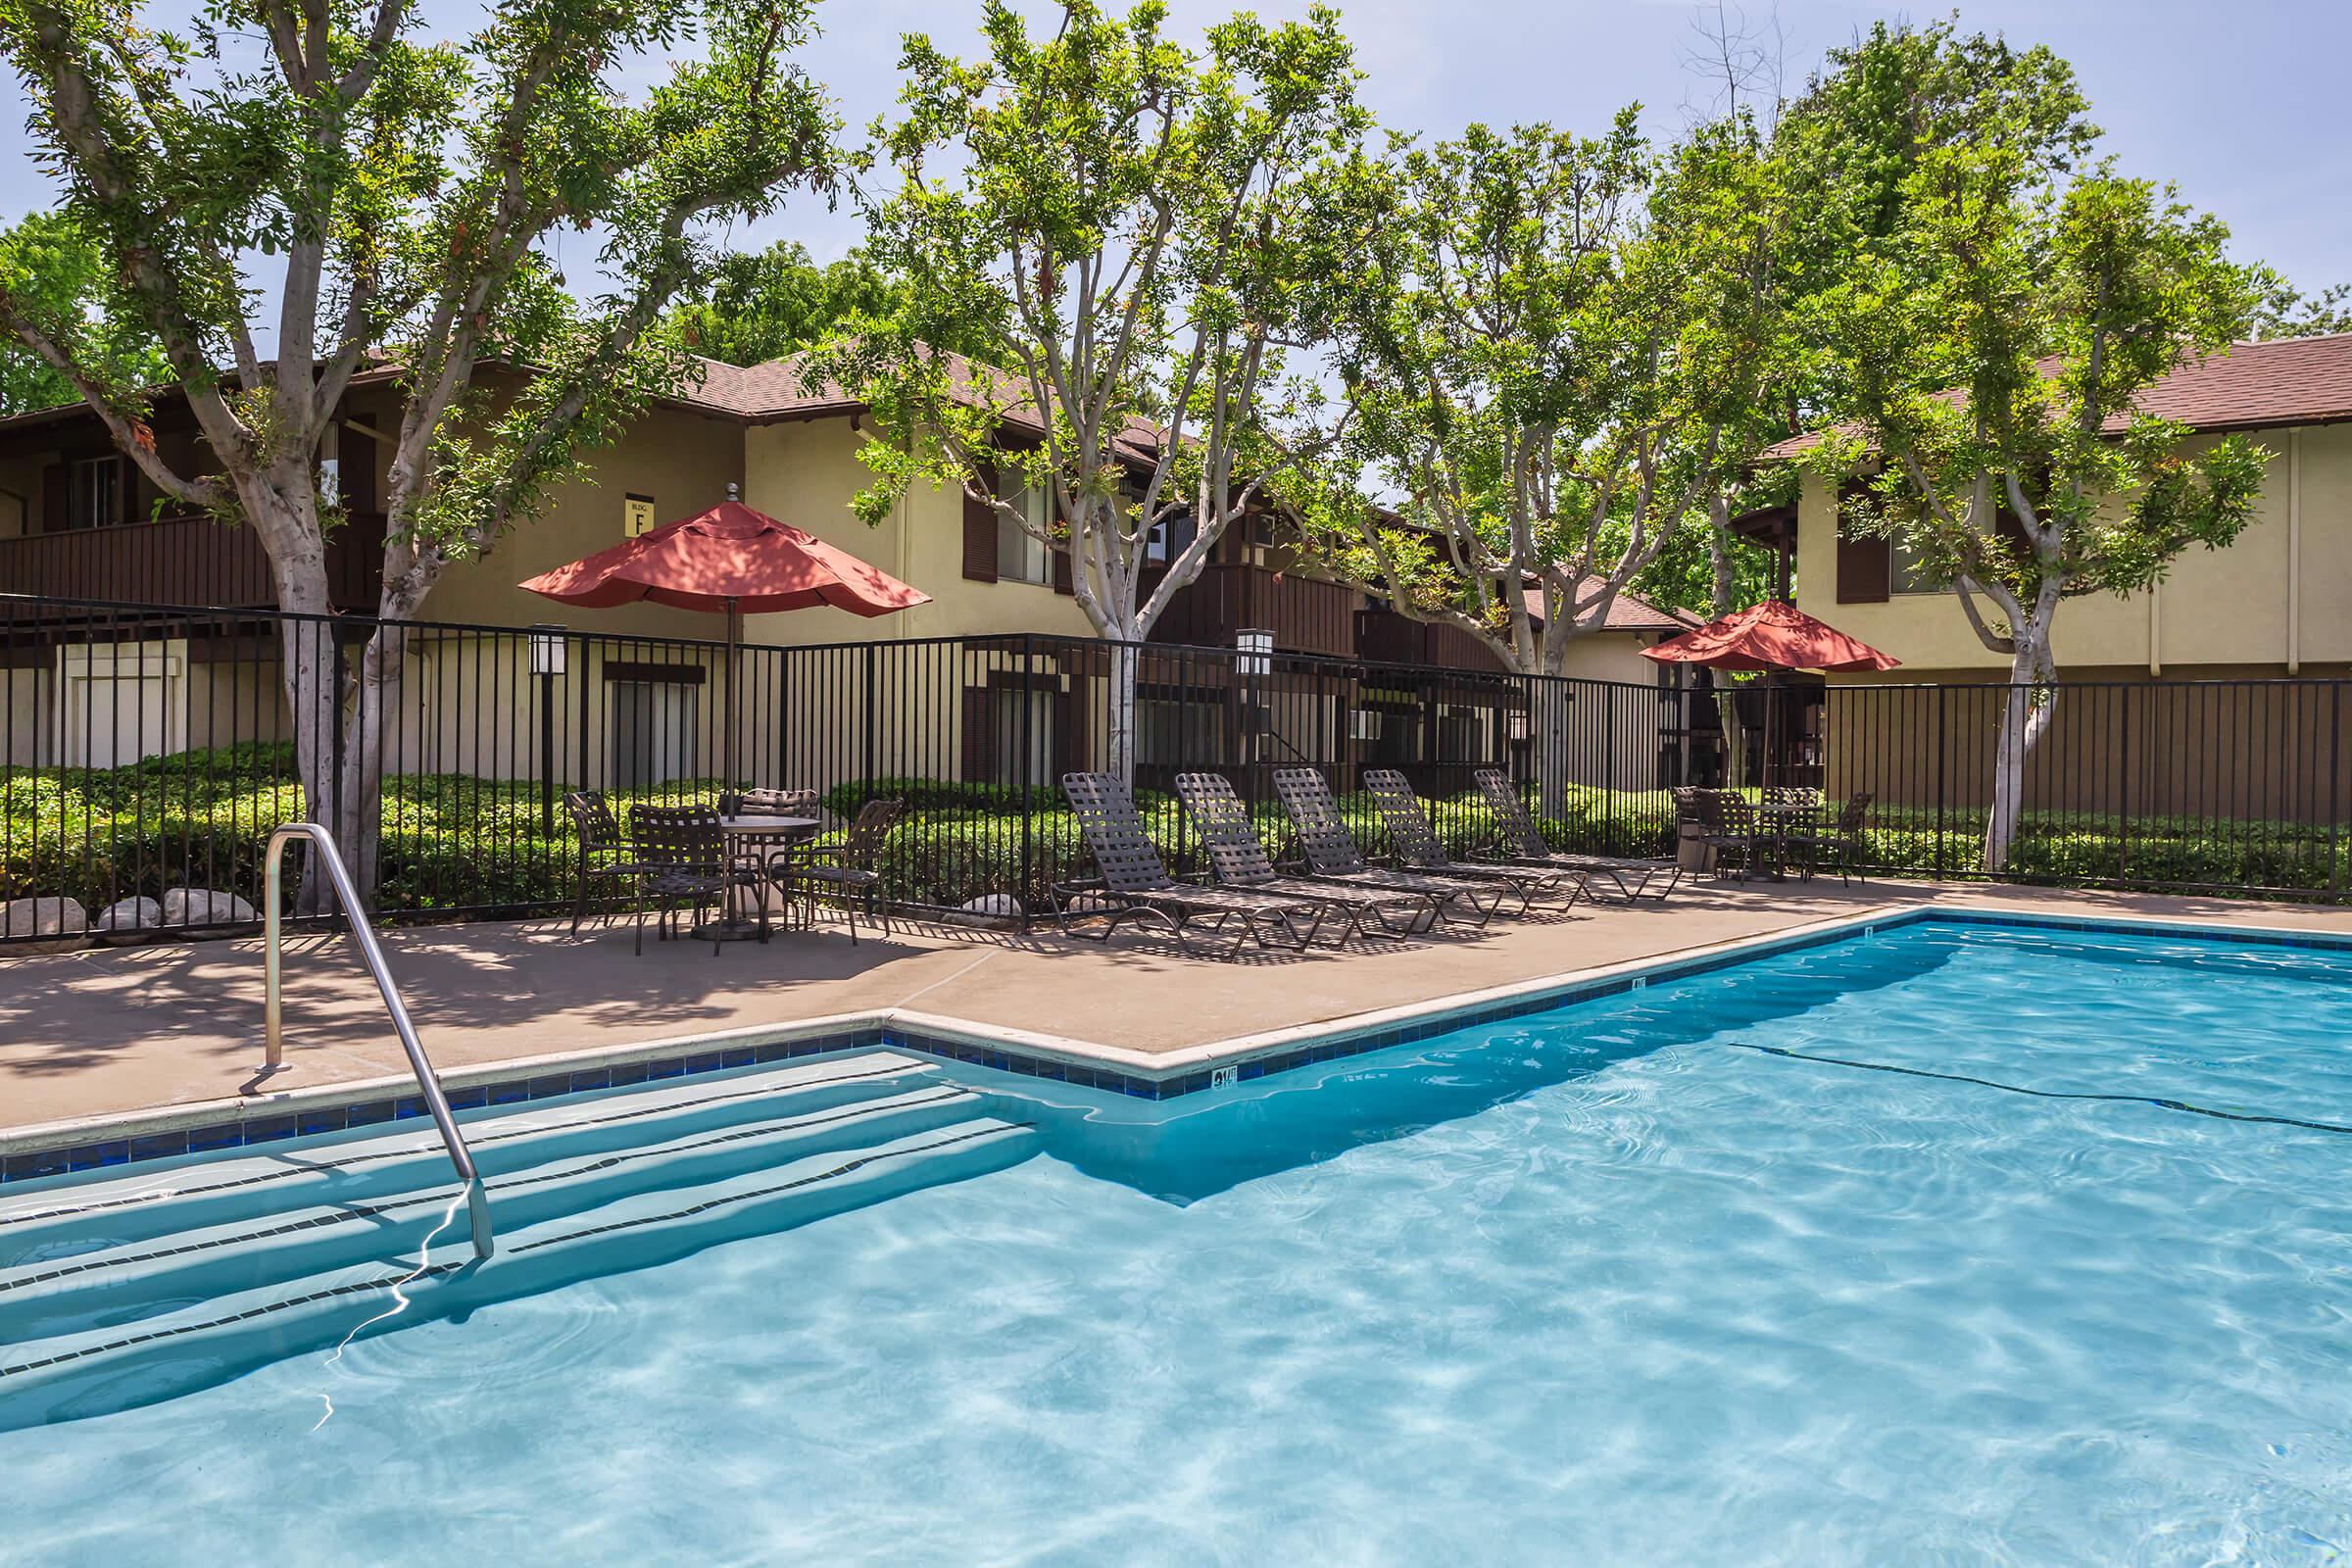 Country Hills Apartment Homes community pool with tables and red umbrellas